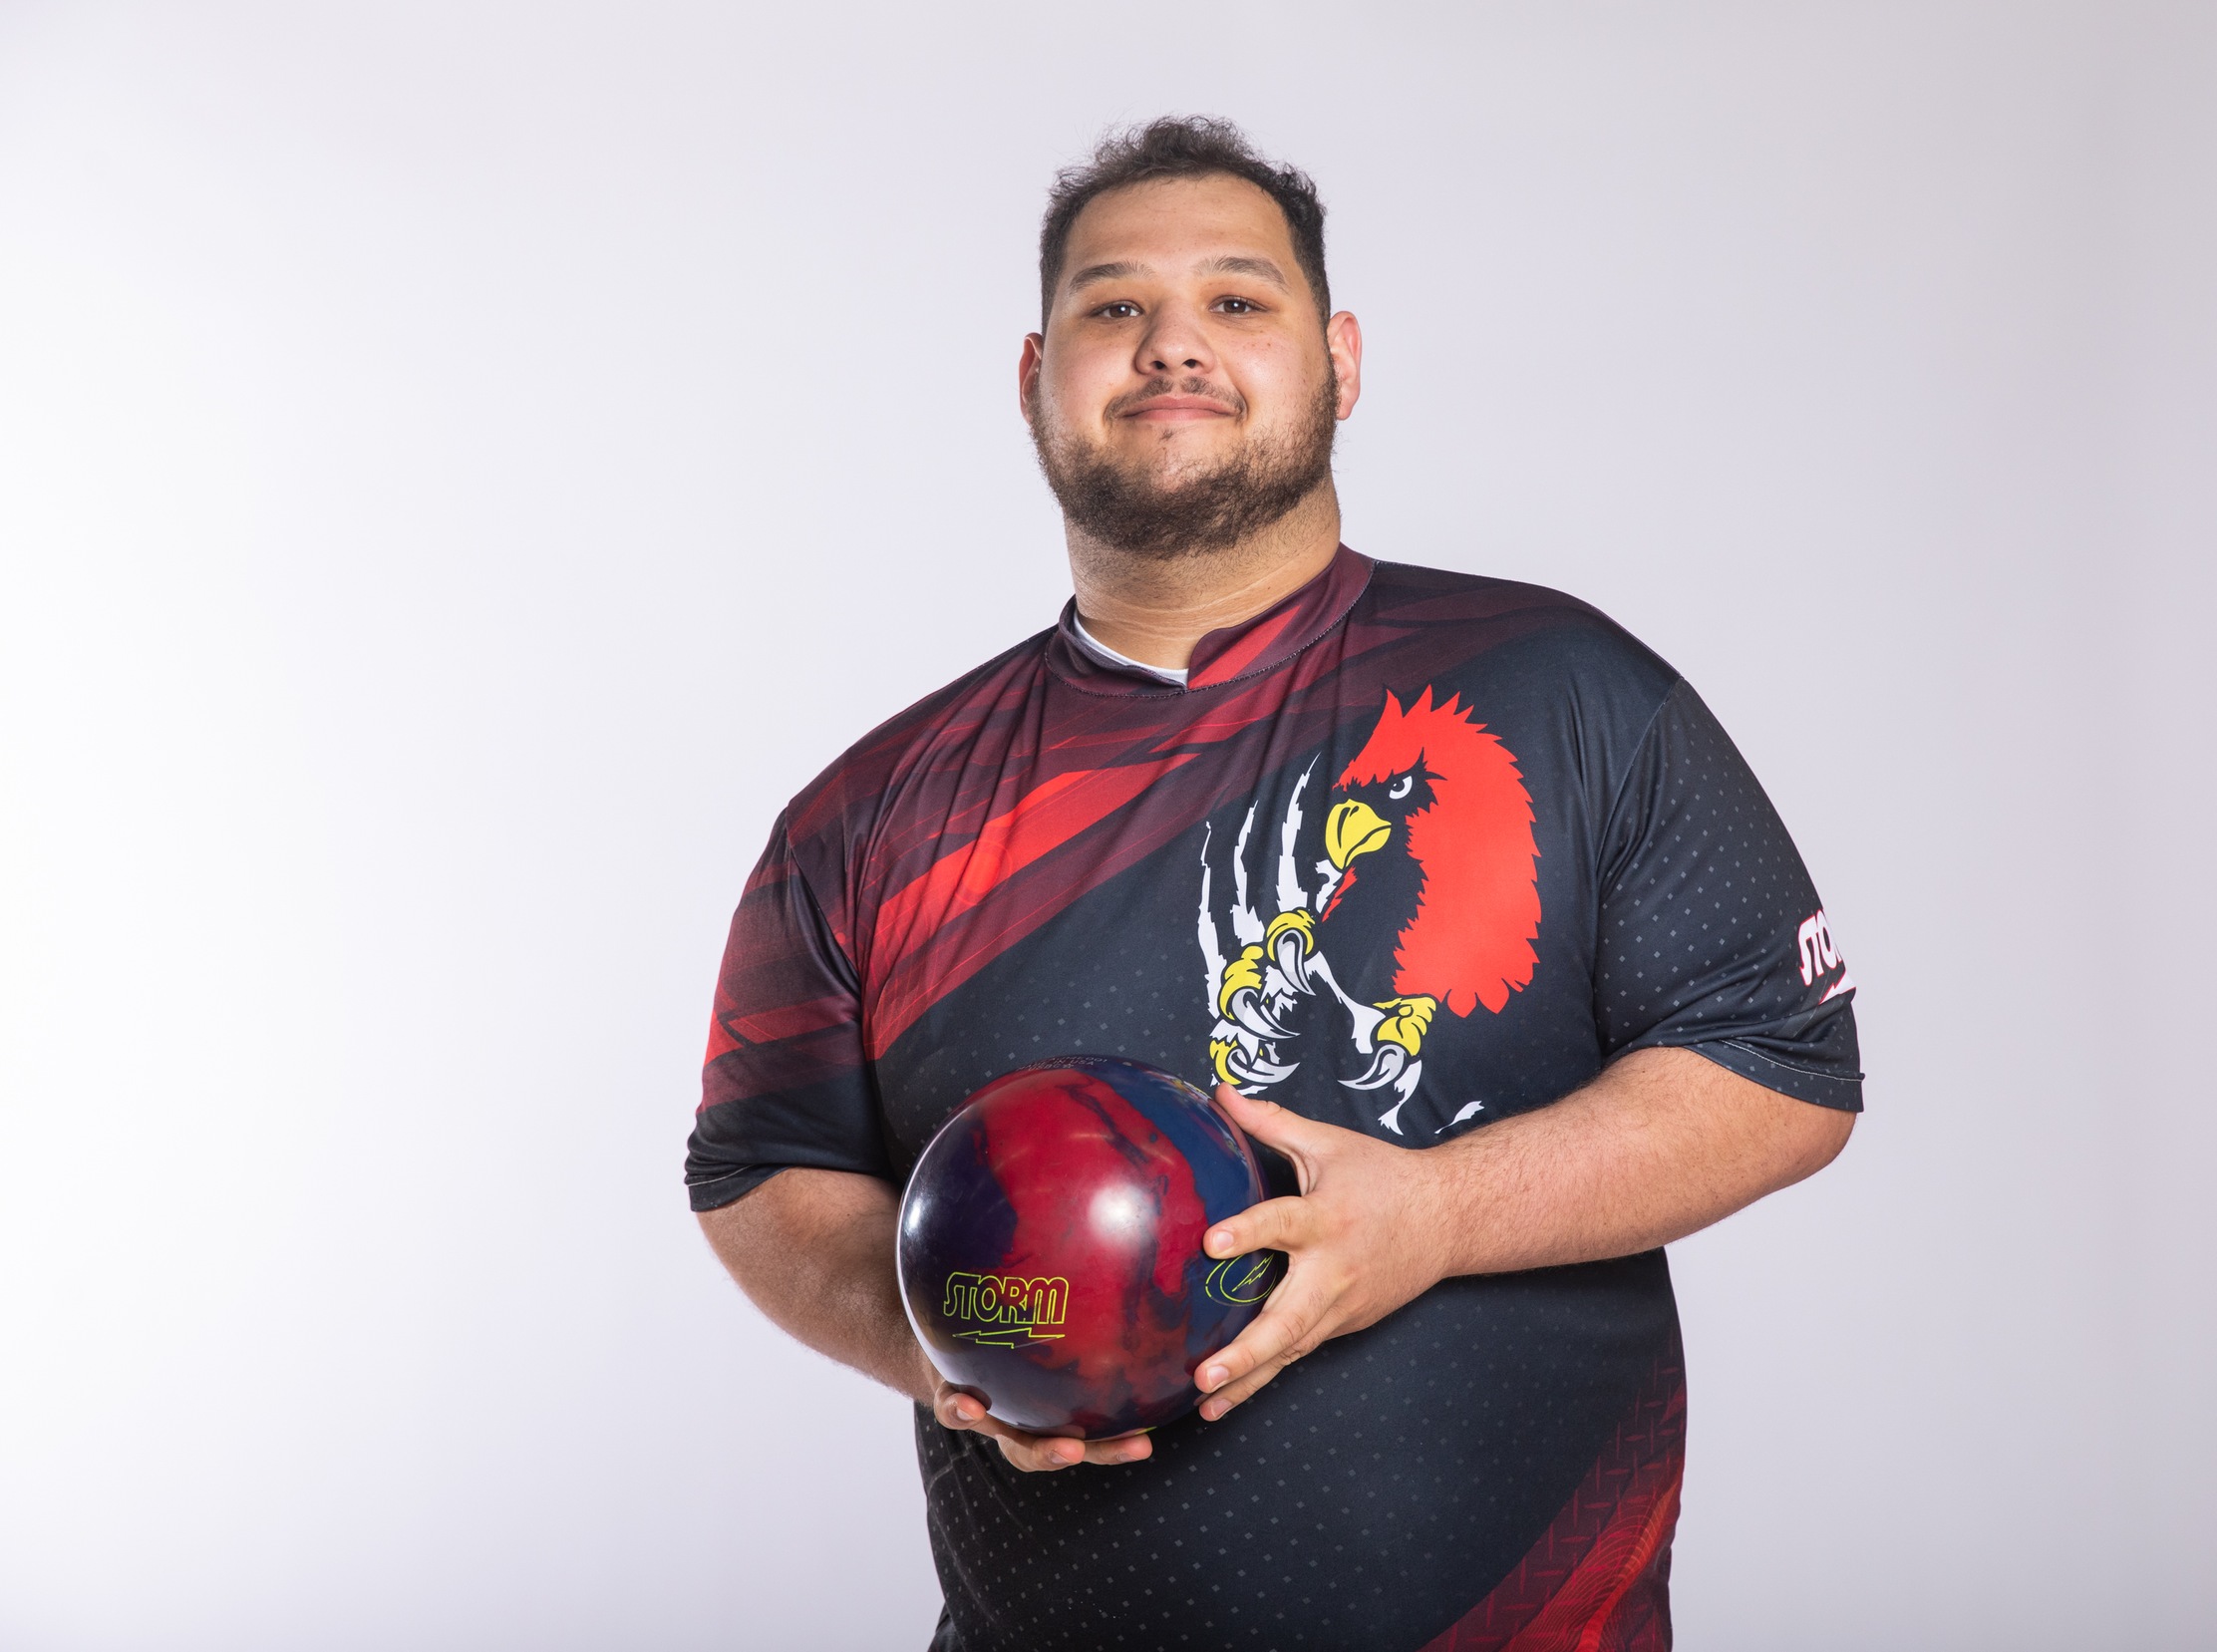 Men's Bowling caps of season at ISC and ITC Sectionals